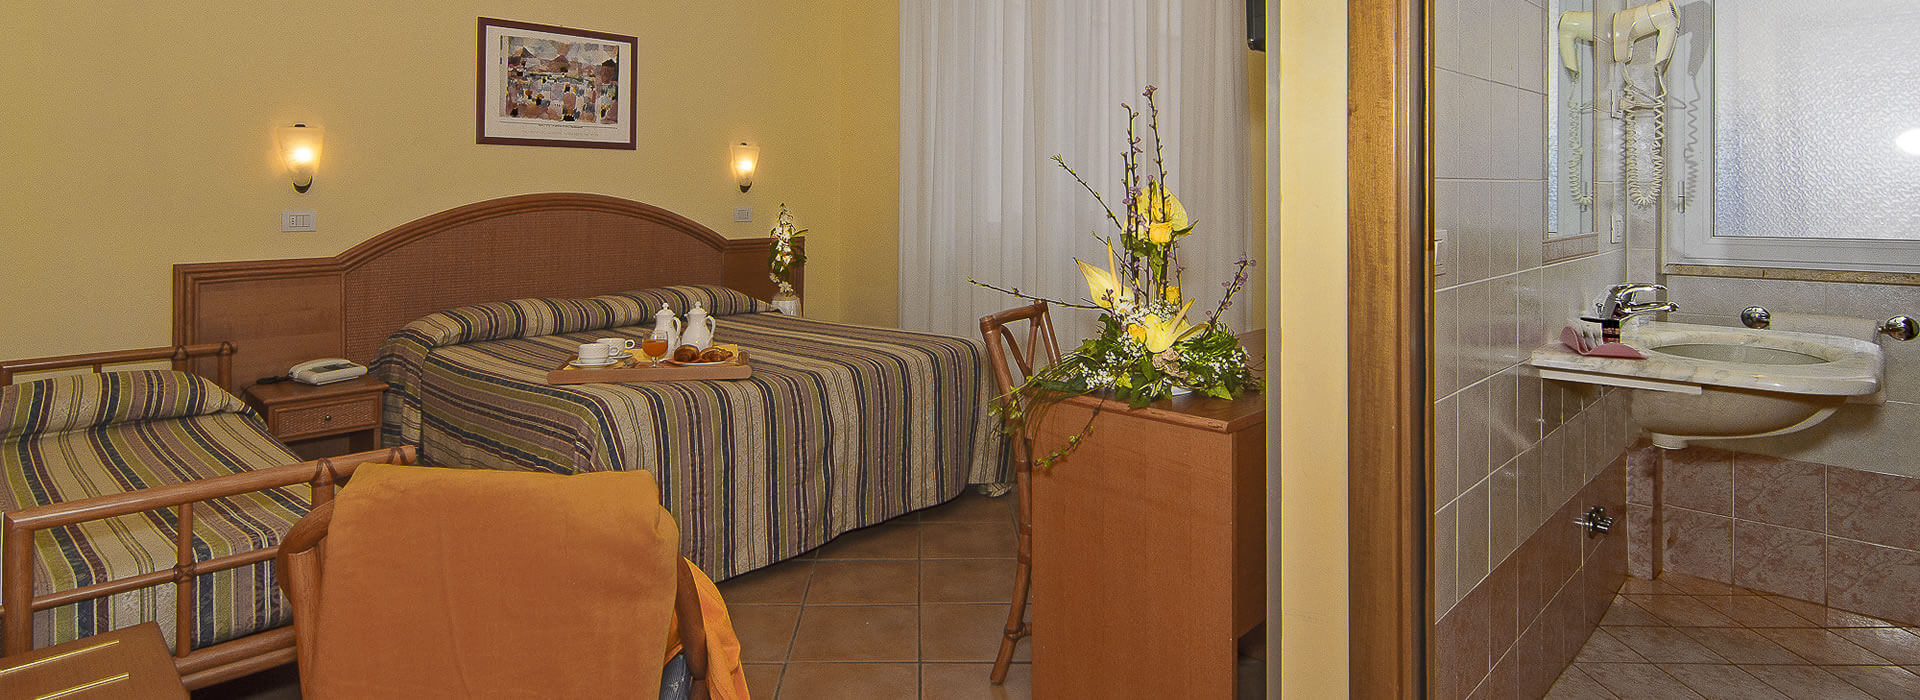 Hotel Katy - Le camere